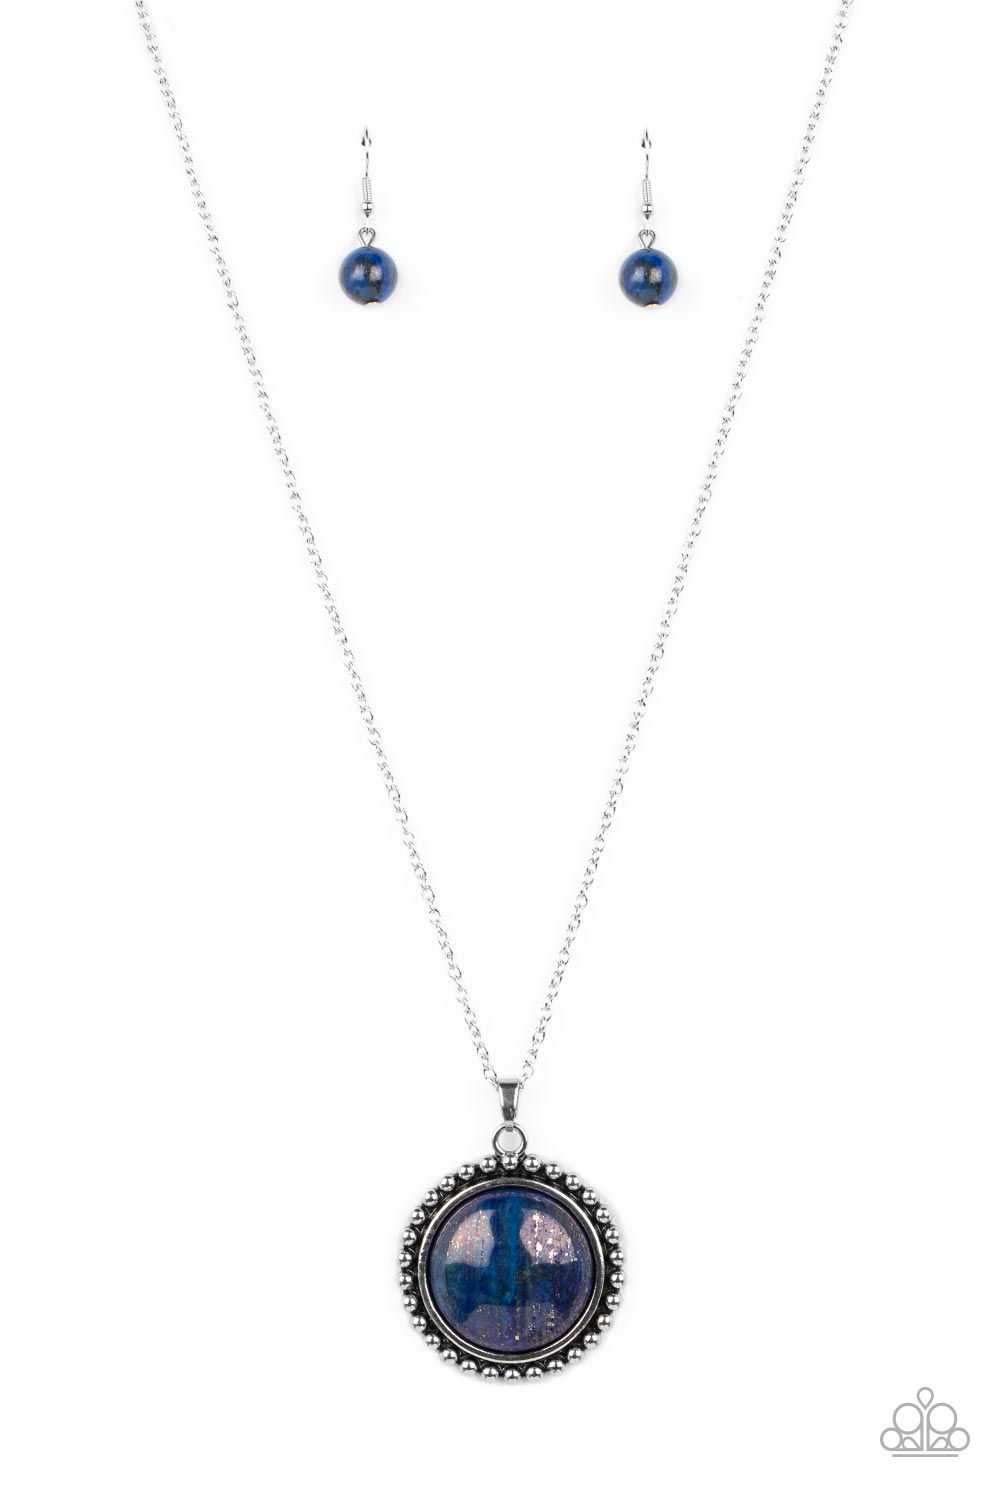 A delicate elongated silver chain leads down to a lapis stone set in the center of a decorative silver-studded frame, creating an exaggerated earthy centerpiece. Features an adjustable clasp closure. As the stone elements in this piece are natural, some color variation is normal